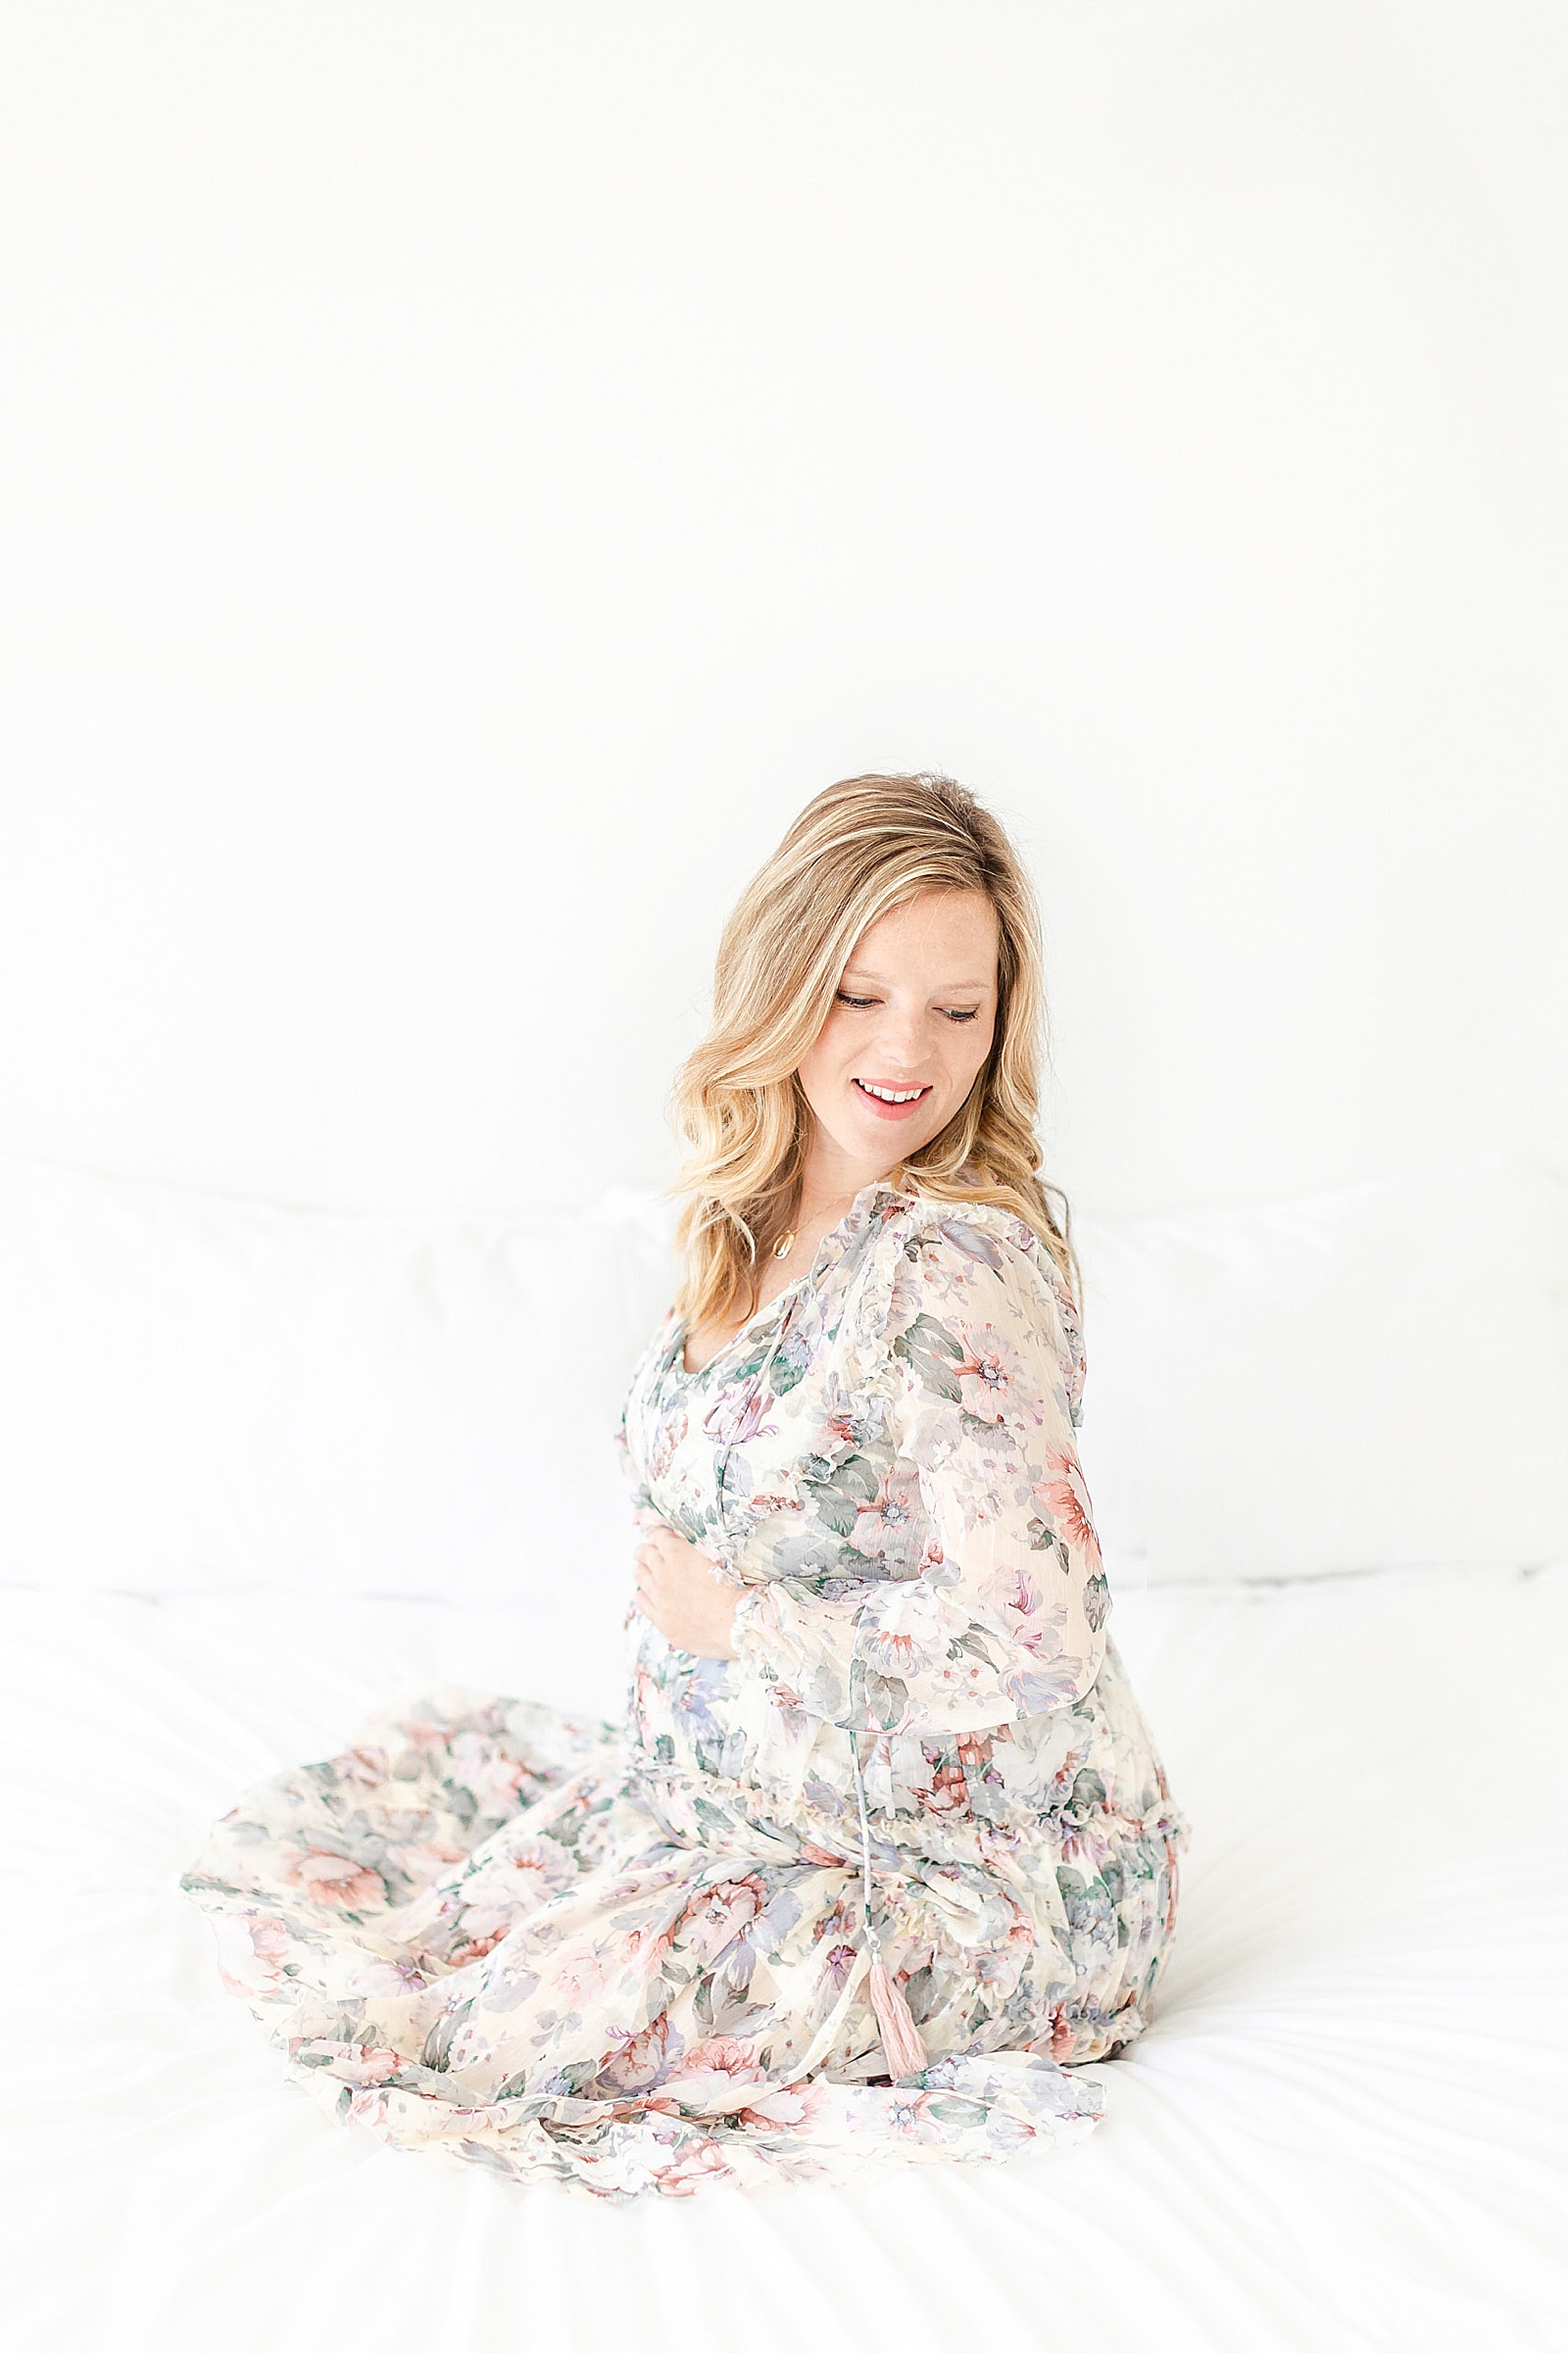 Maternity photo of mom sitting on bed in floral dress holding baby bump and looking down shoulder